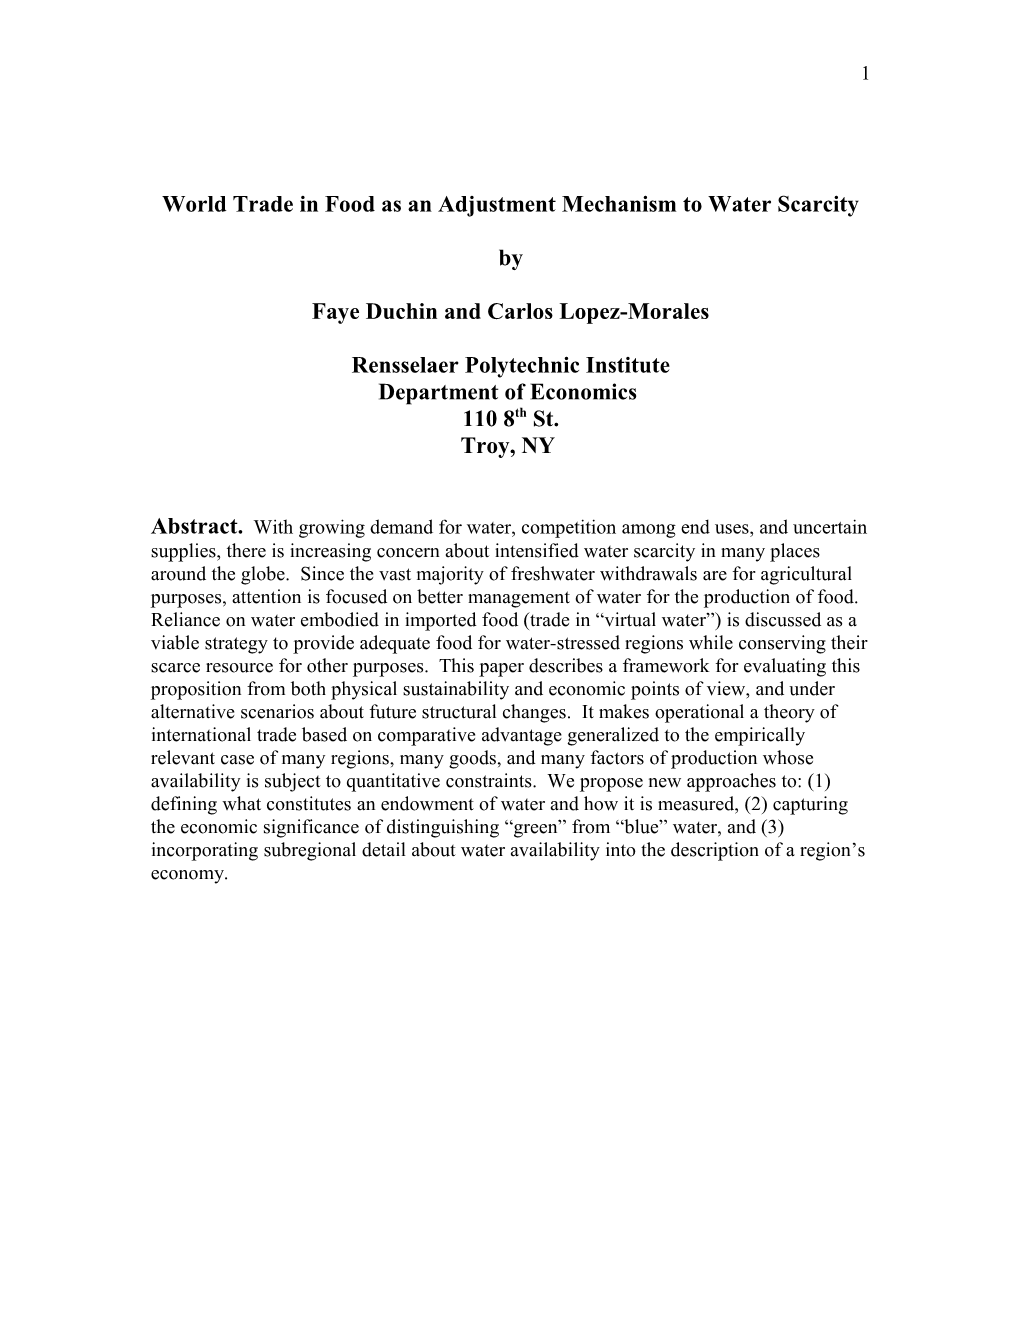 World Trade in Food As an Adjustment Mechanism to Water Scarcity